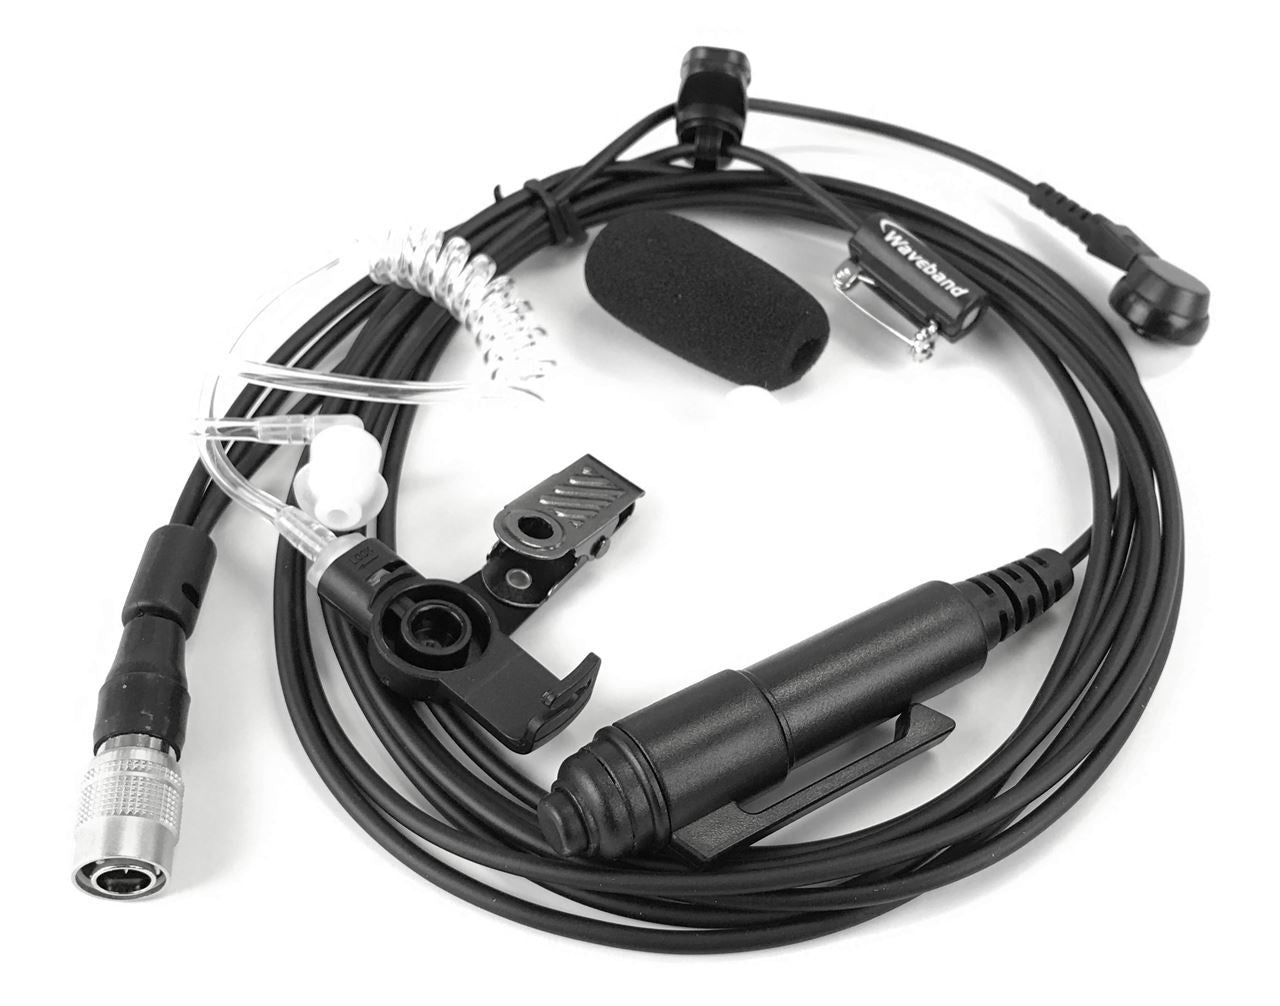 Comparable KHS-12 3 wire mini lapel mic with earphone for use with the Kenwood NX-5410 Portable Radio - Waveband Communications